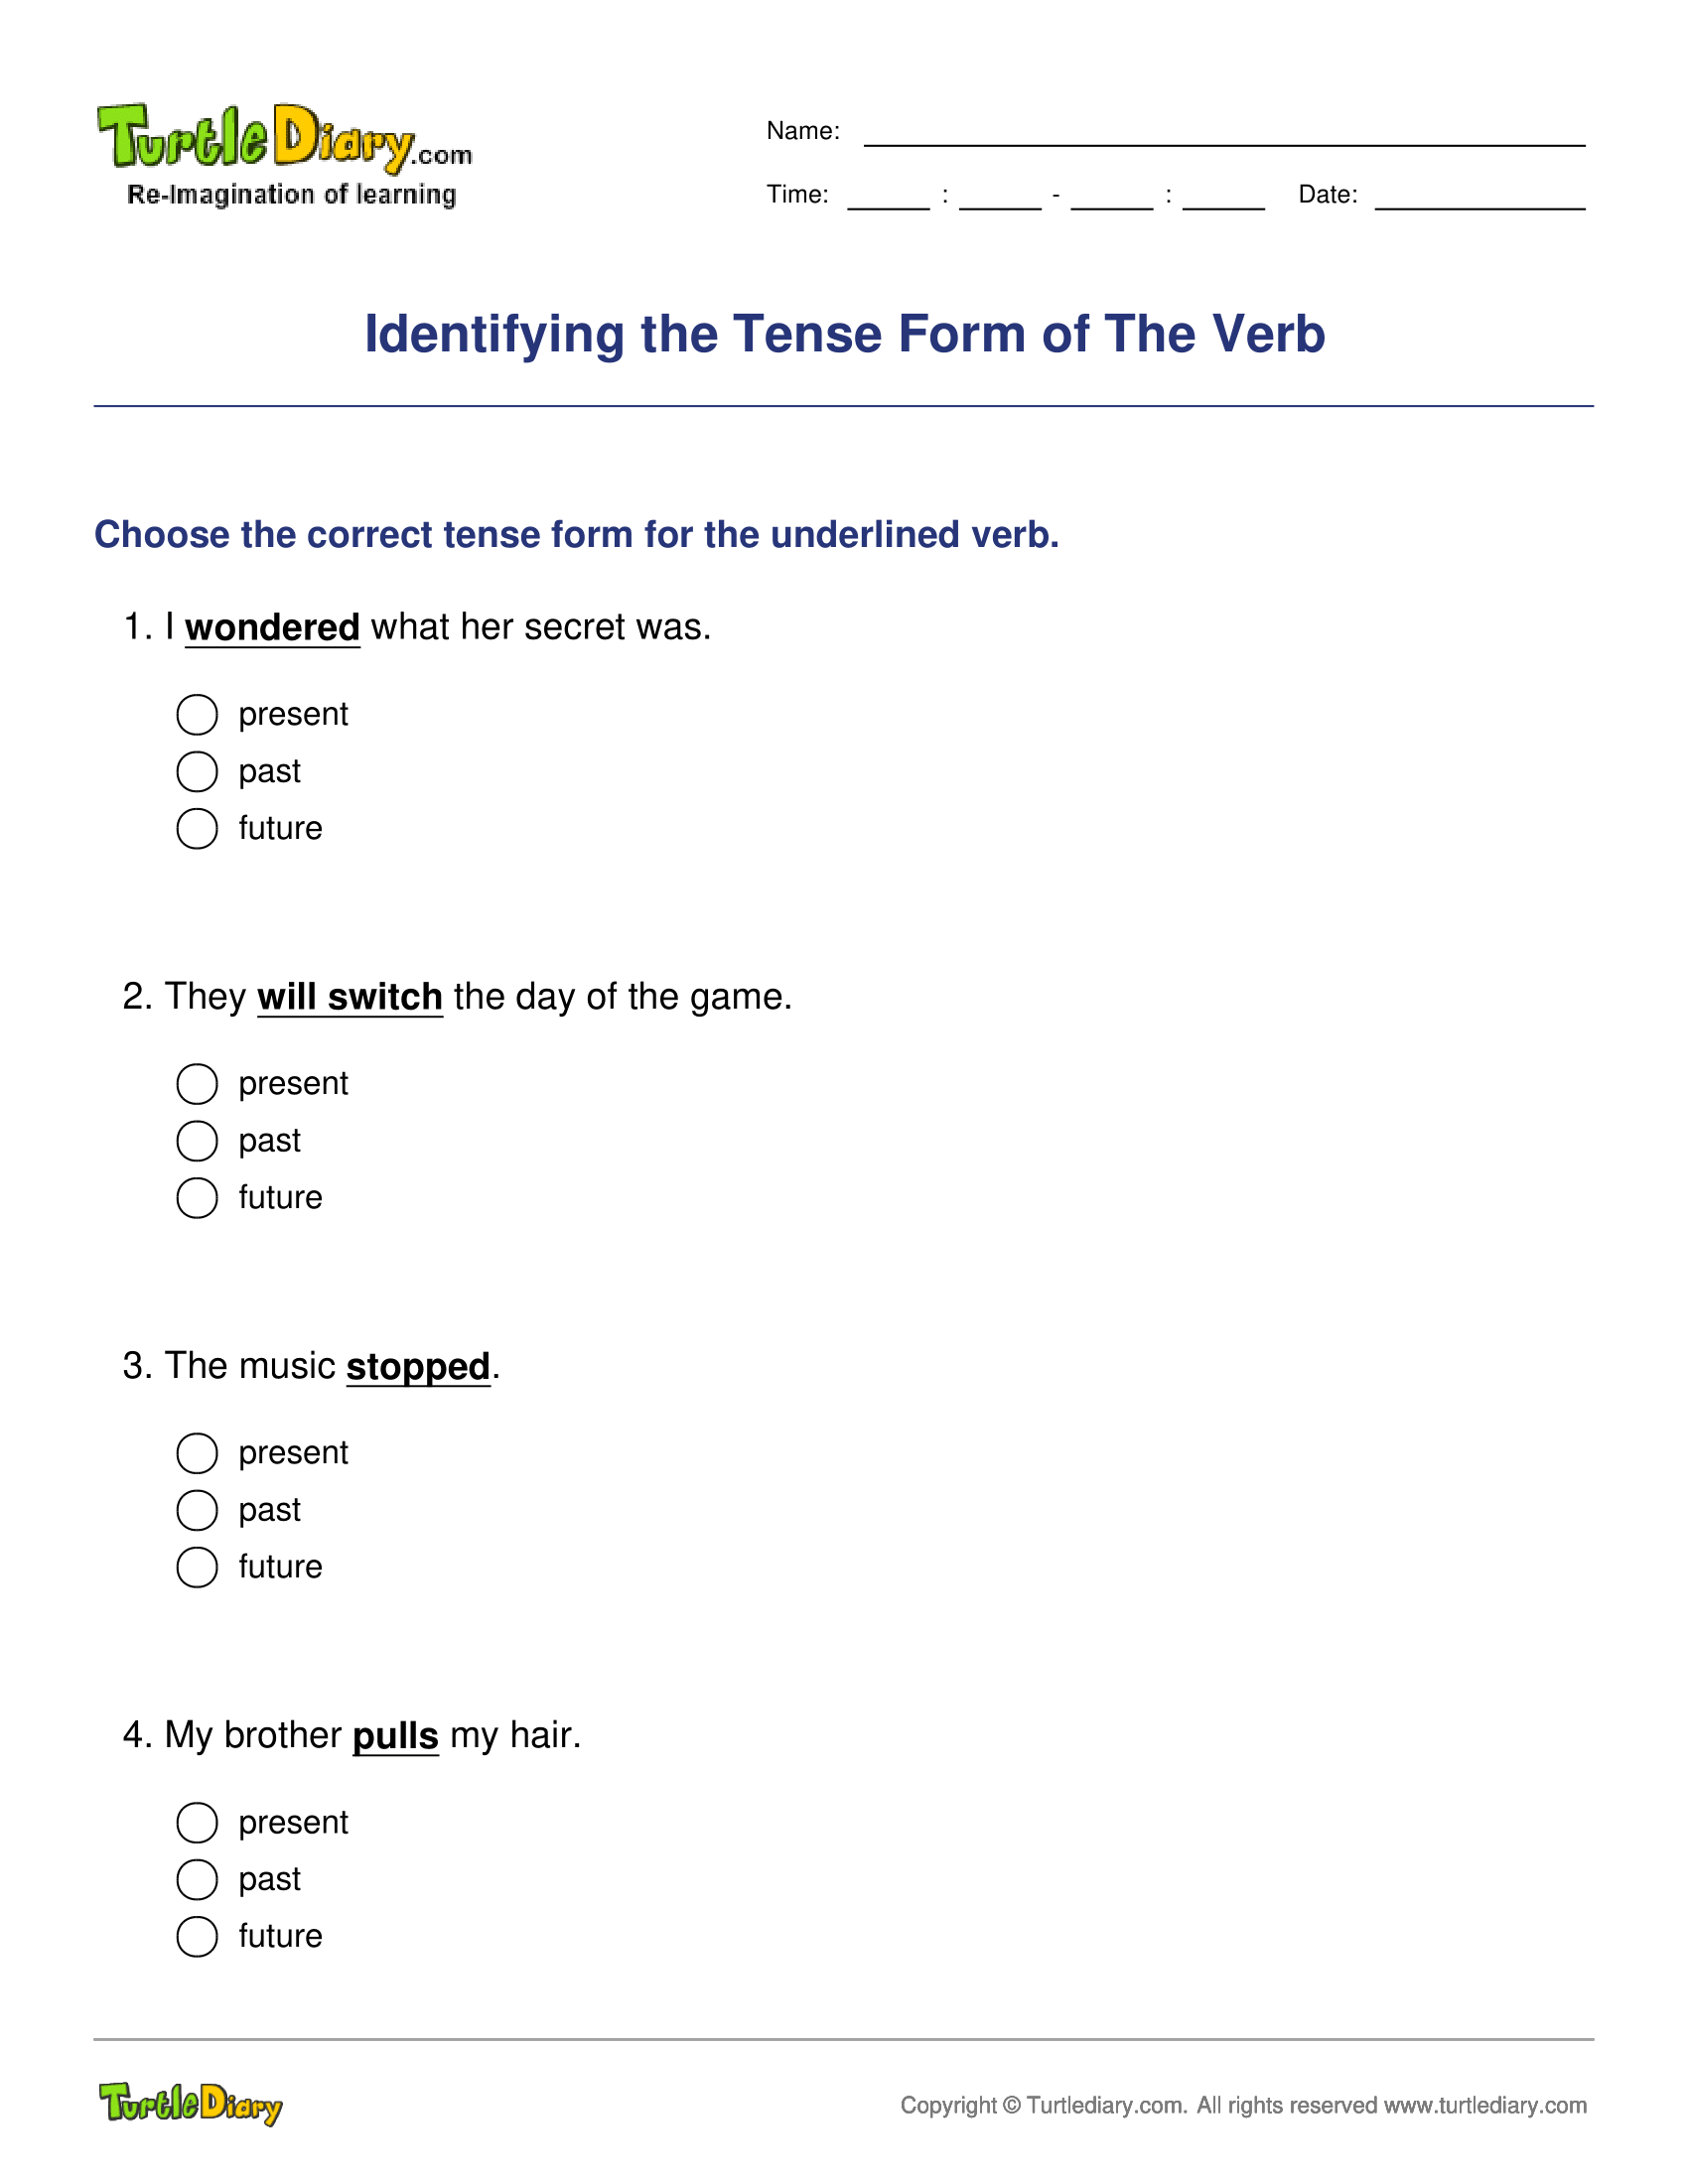 Identifying the Tense Form of The Verb